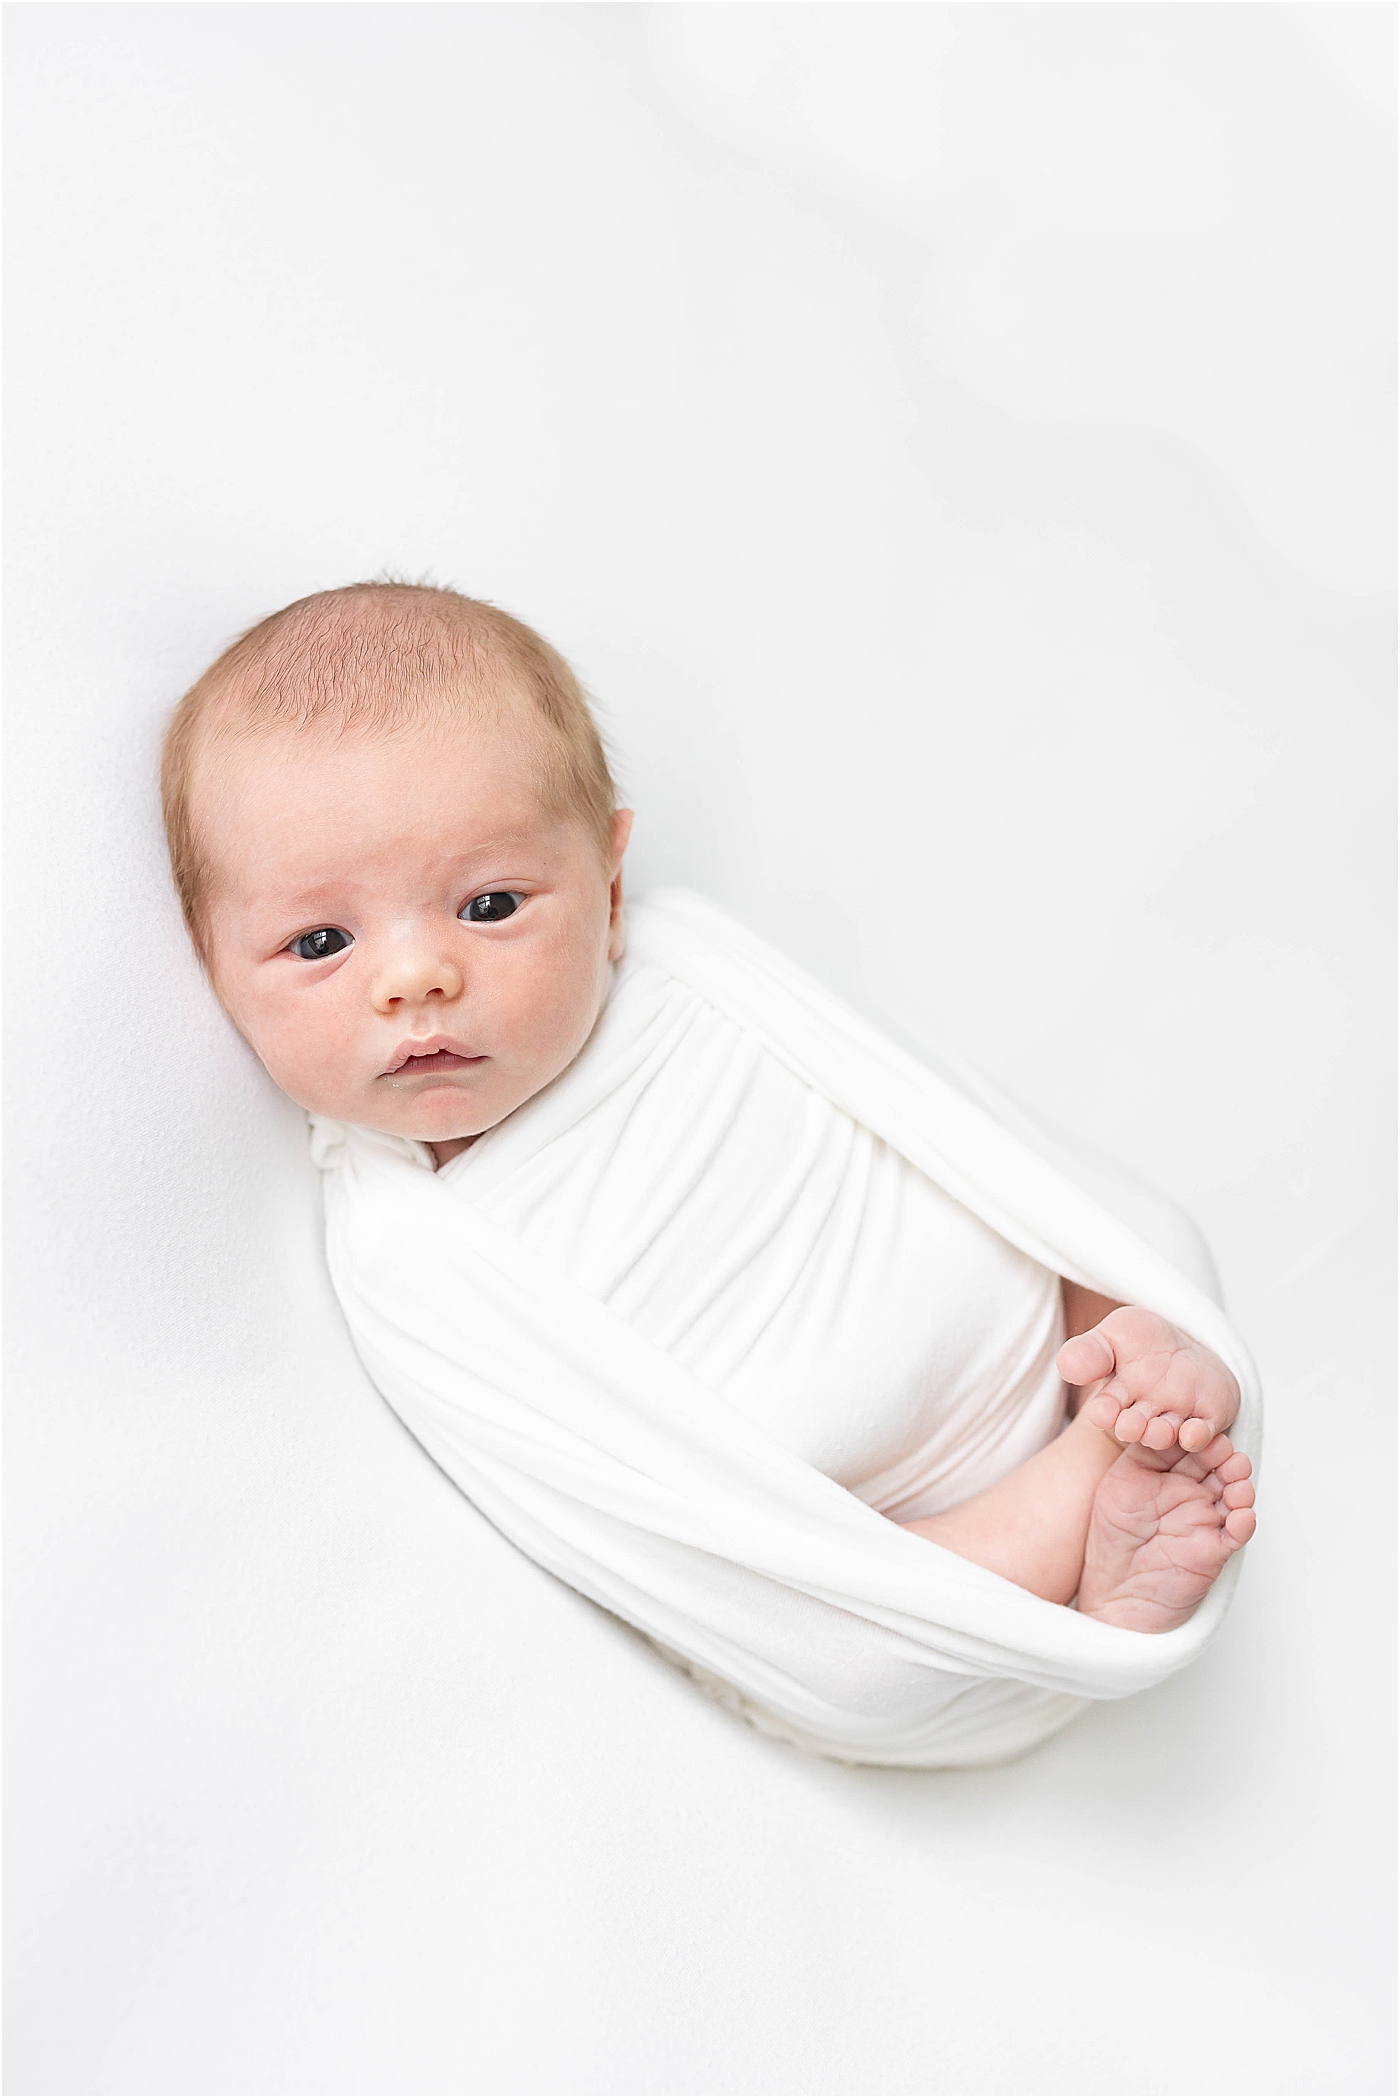 Fishers, Indiana studio photography session for newborn